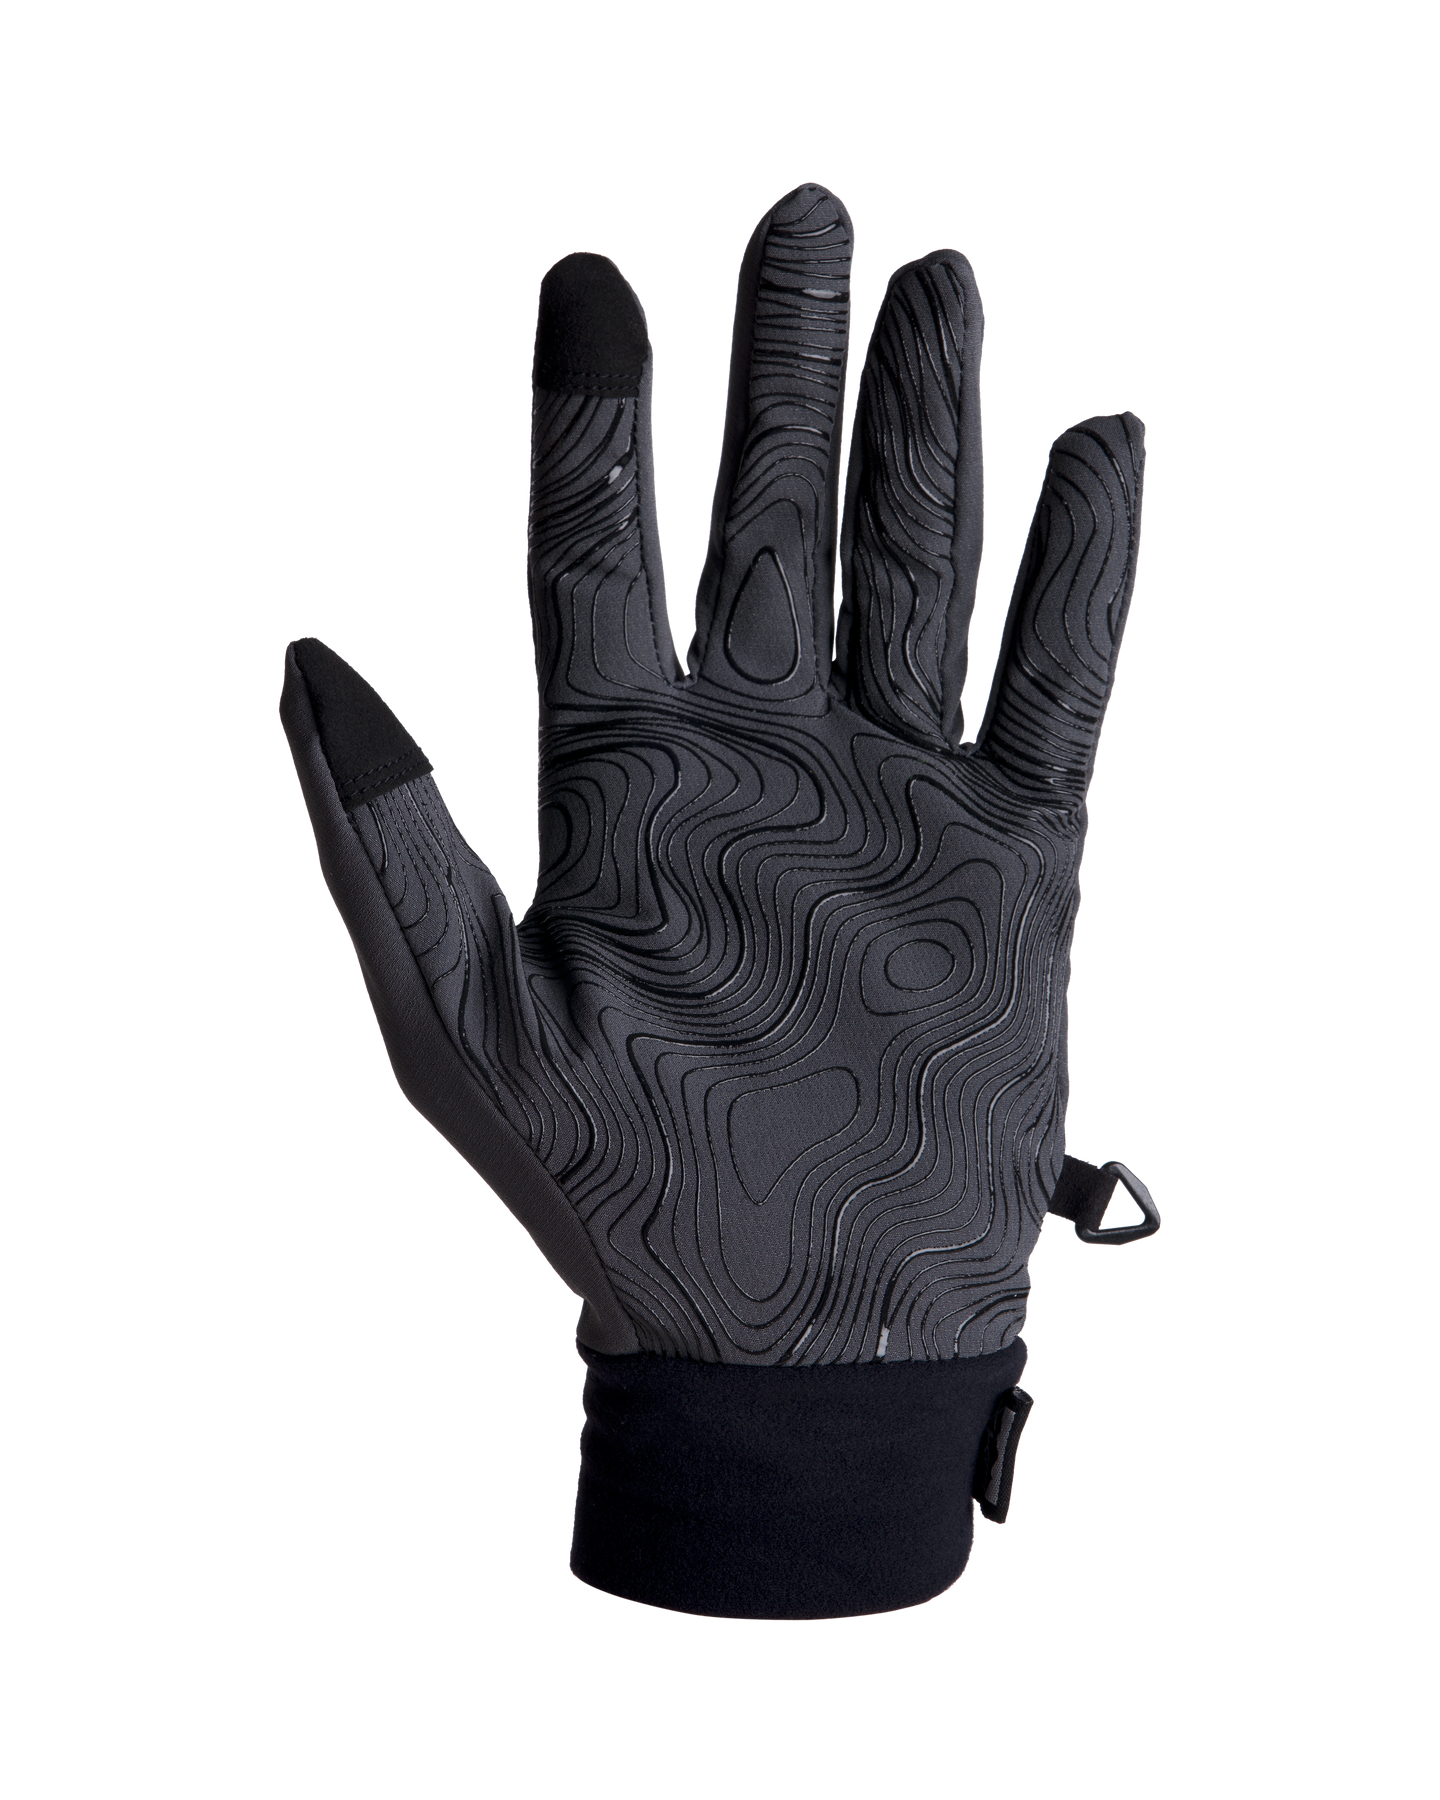 King's Camo XKG Insulated Gloves XK7